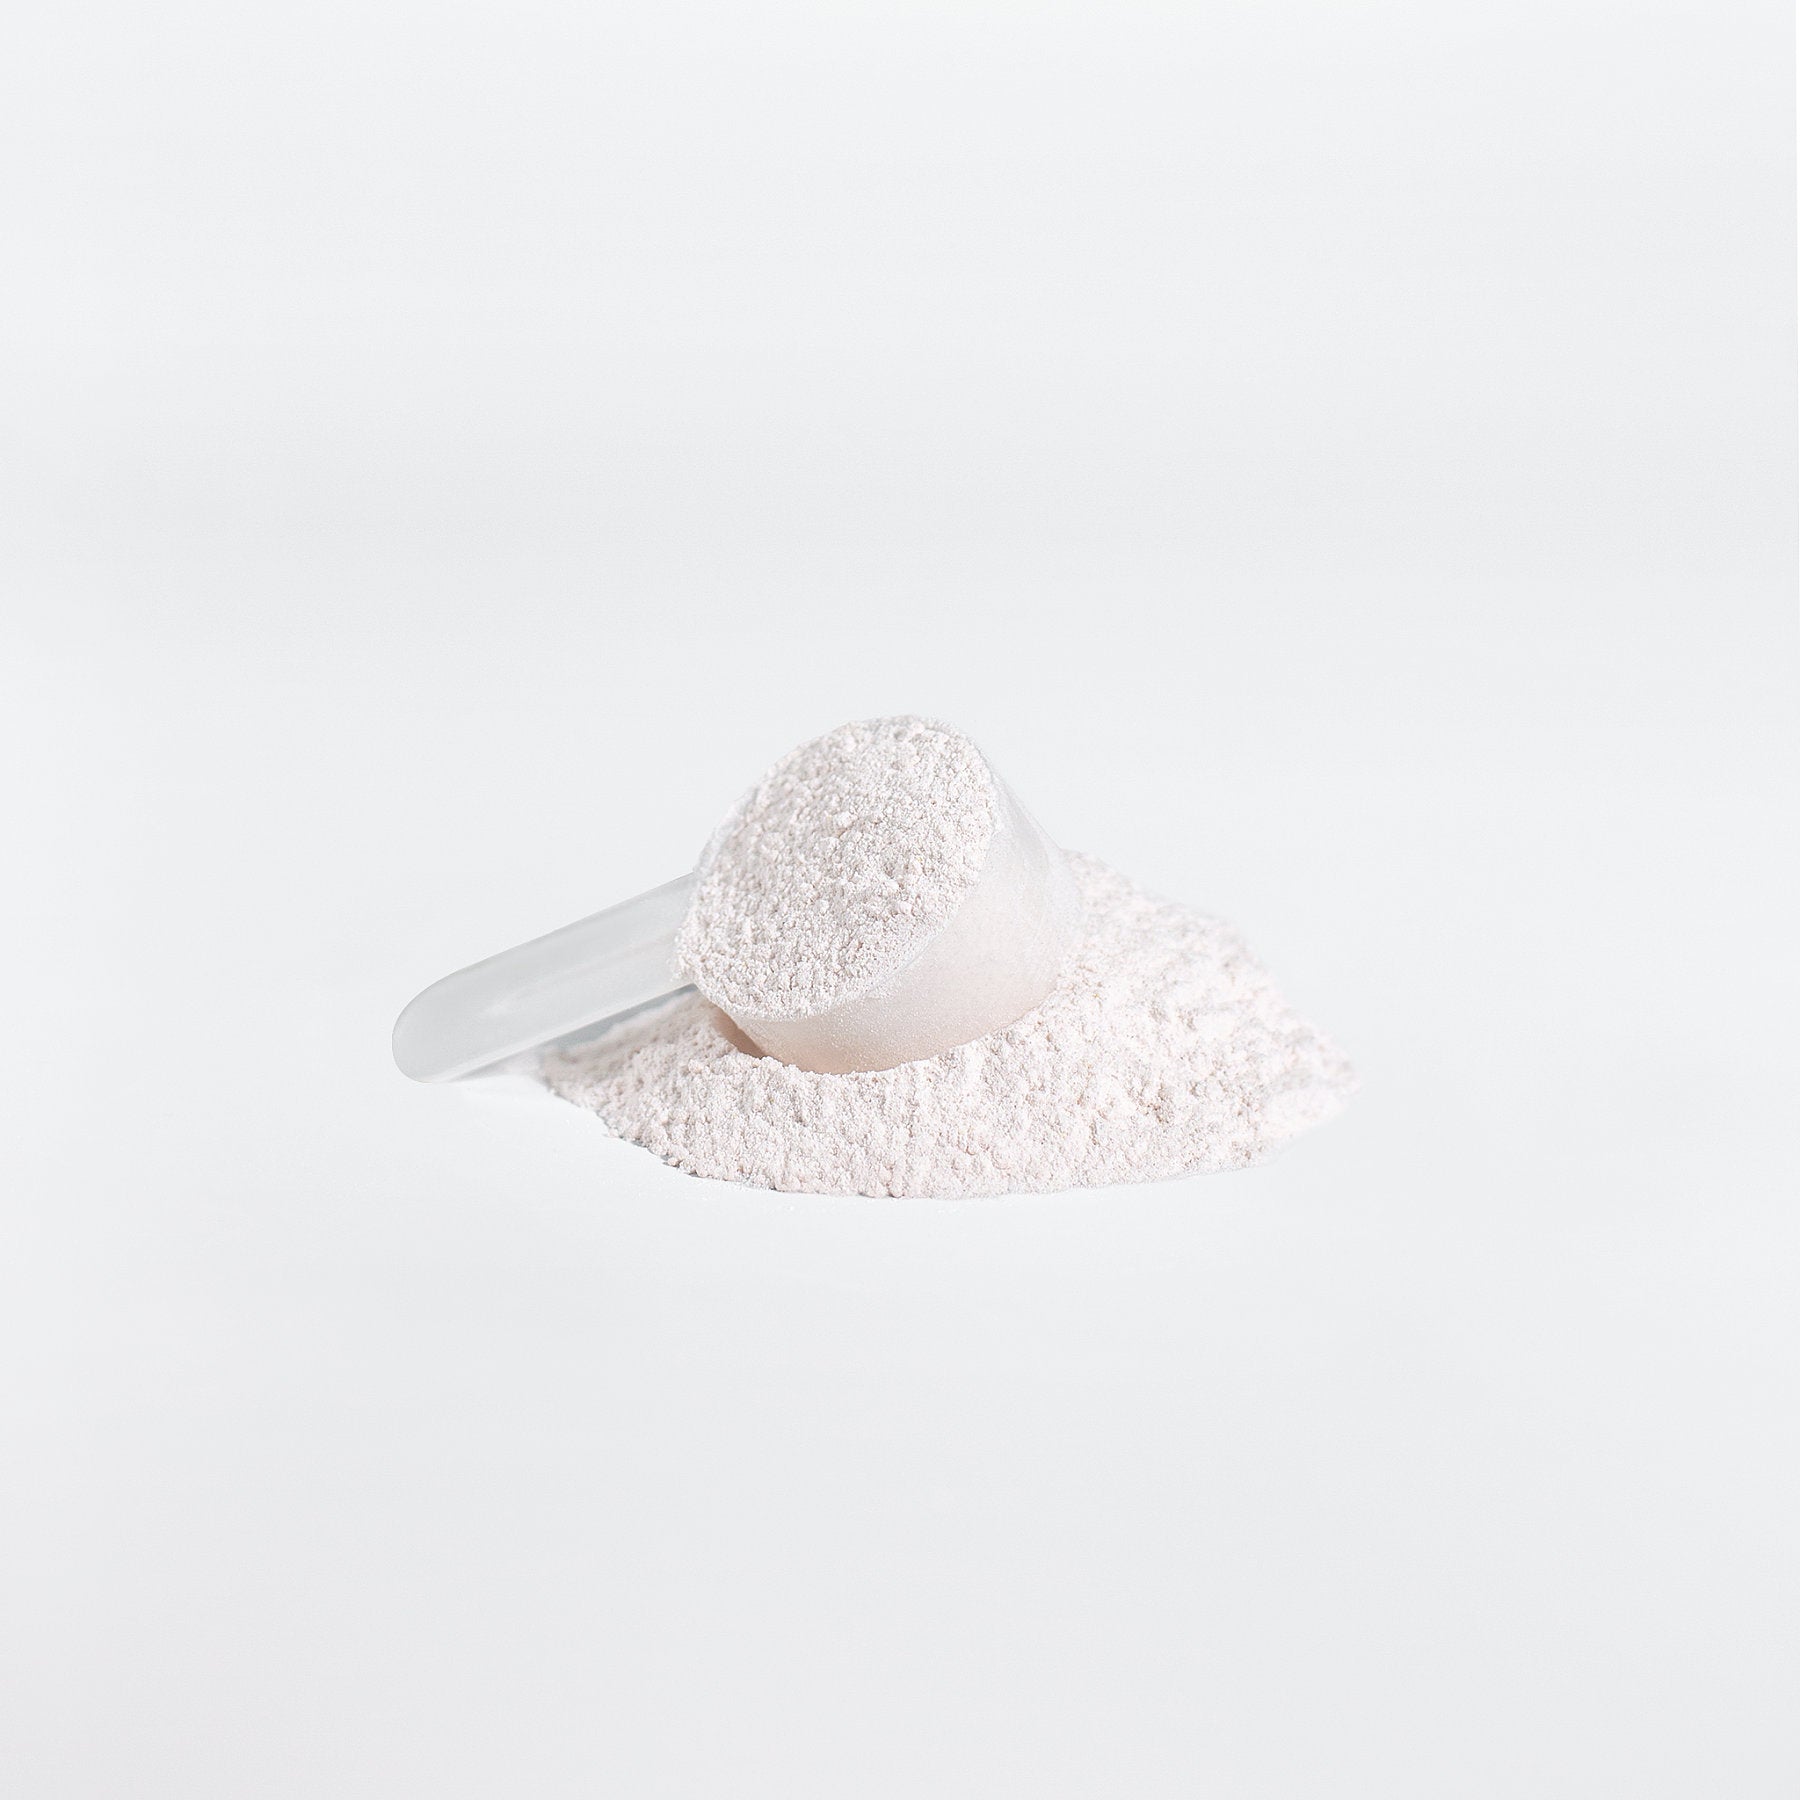 scoop of recovery elite premium post workout powder